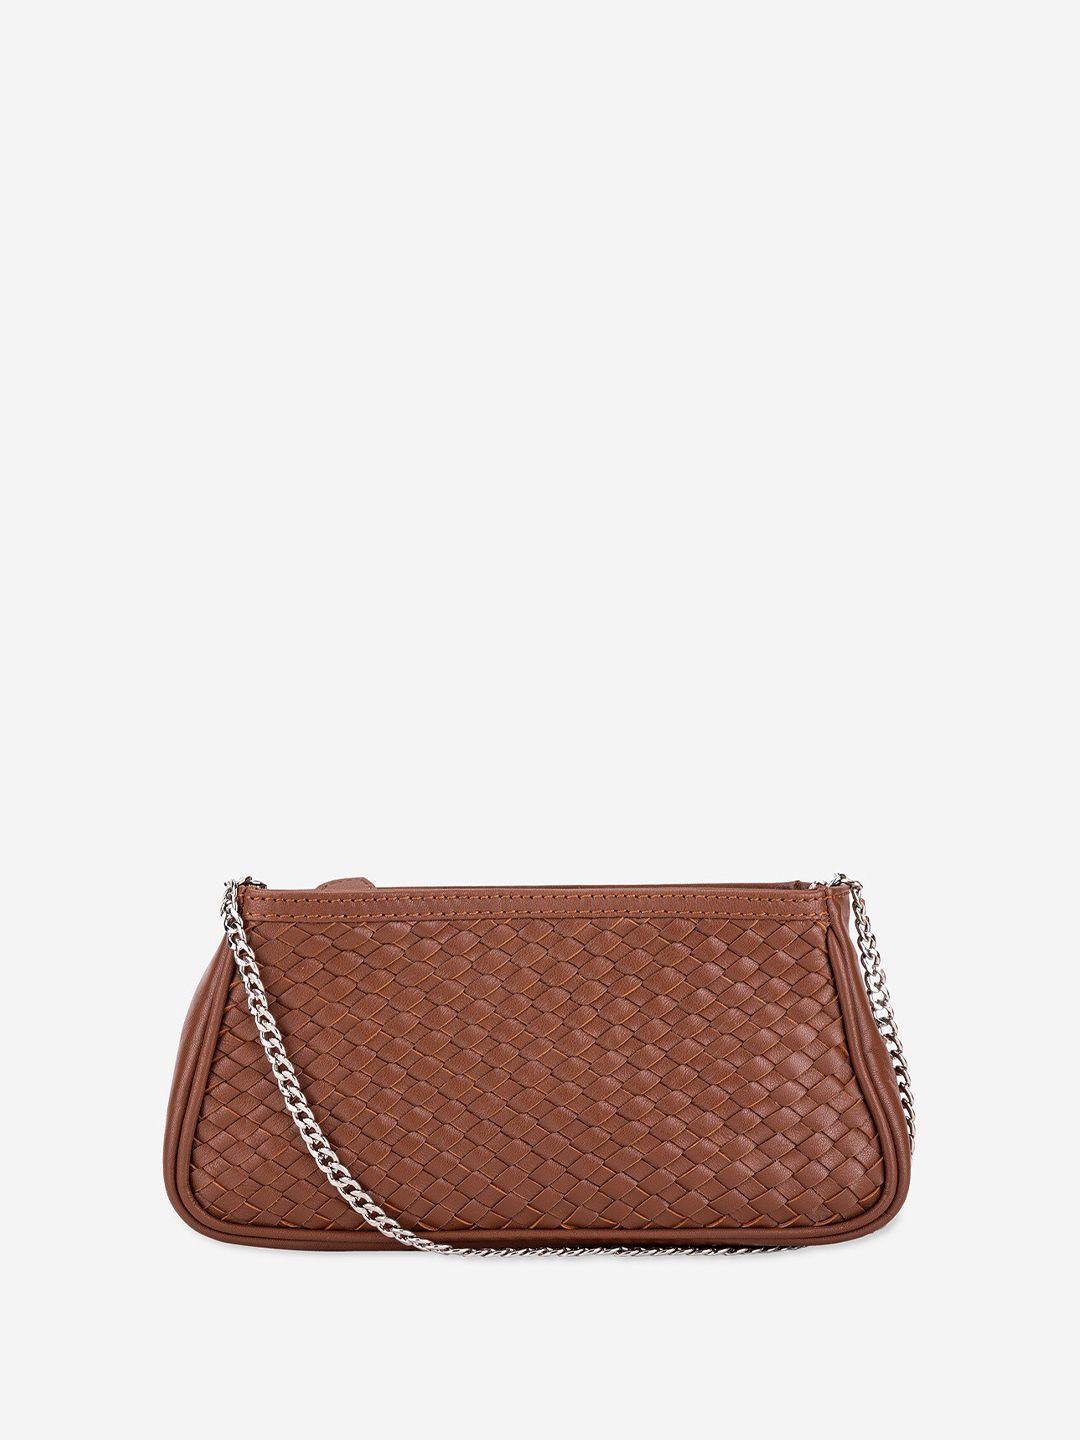 abelardo de moda textured leather structured sling bag with quilted